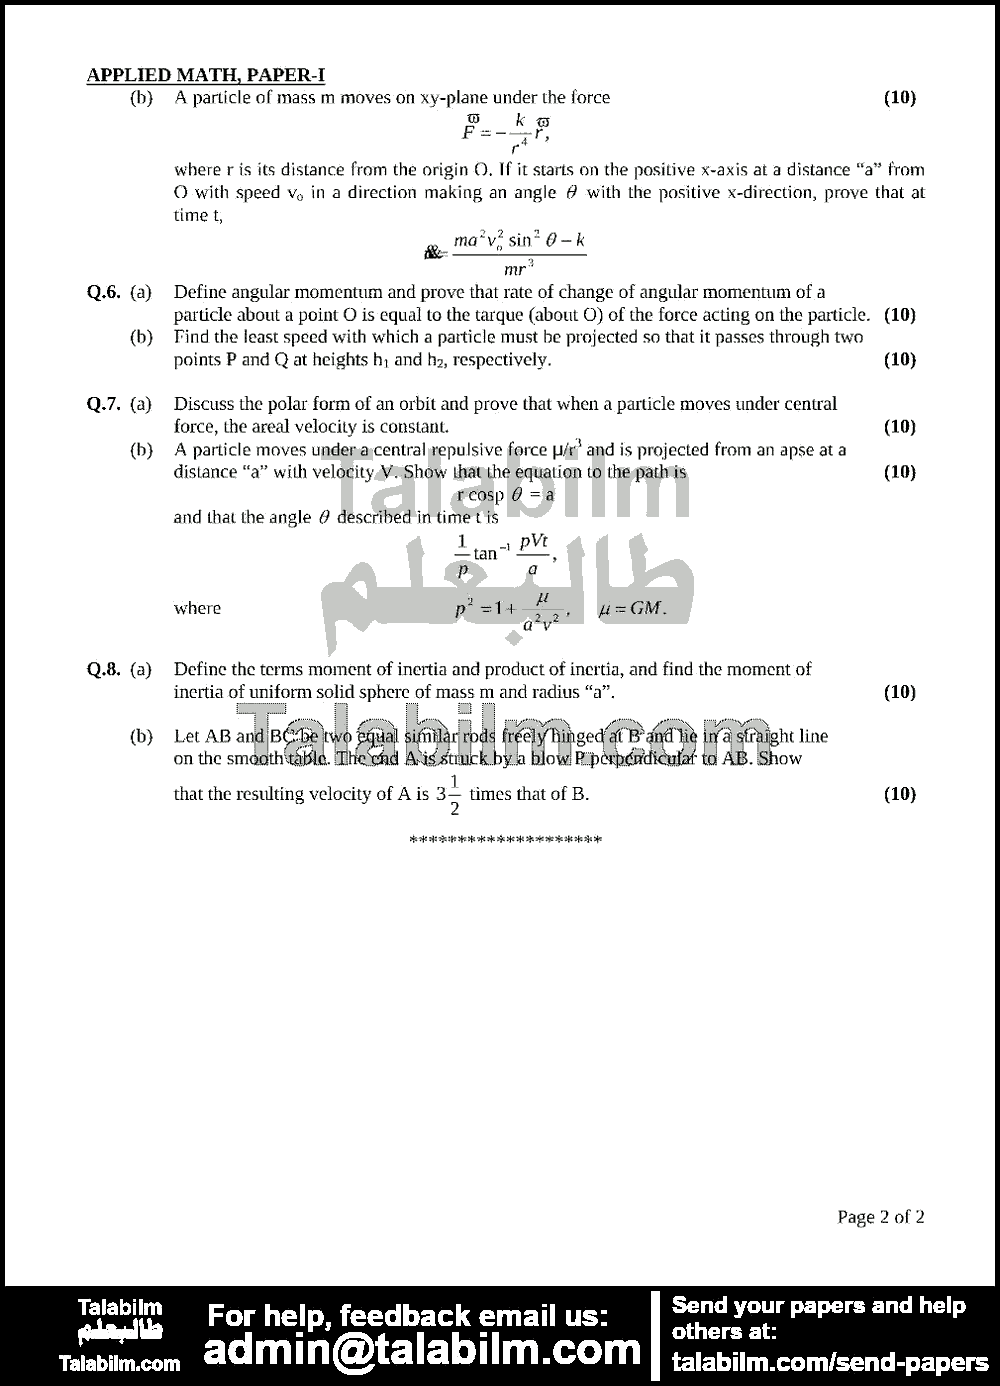 Applied Mathematics 0 past paper for 2009 Page No. 2